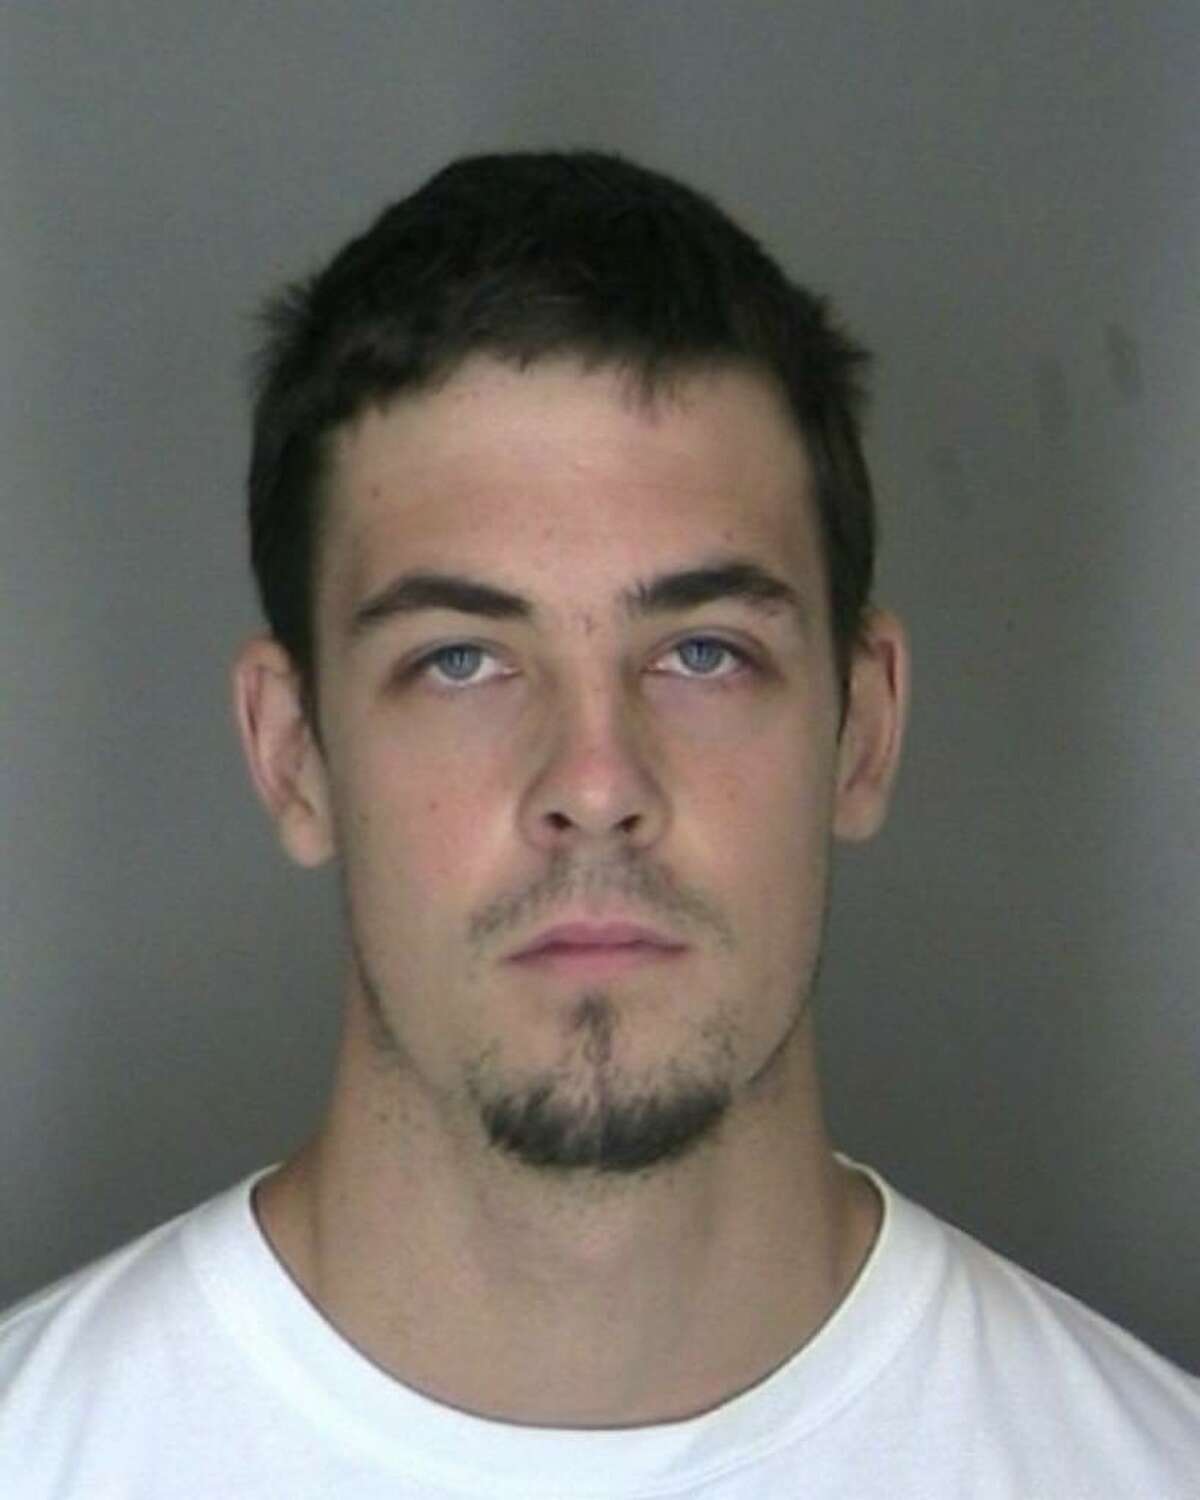 Bryan Ashline, 23, of Watervliet is accused of killing his ex-girlfriend and their baby.